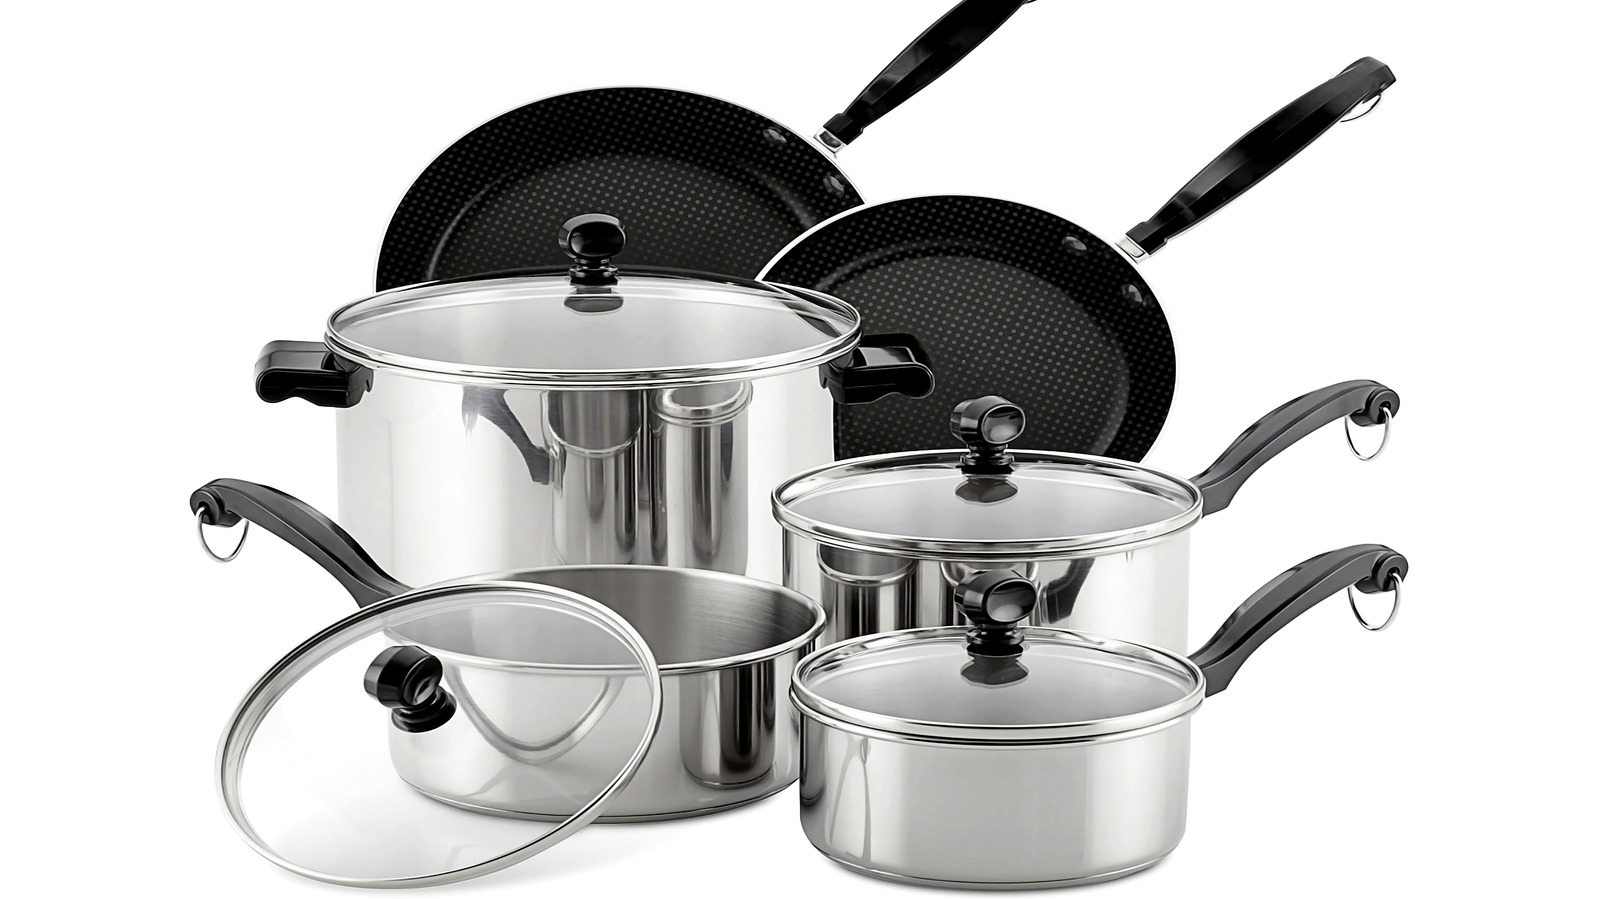 https://www.thedailymeal.com/img/gallery/the-12-best-cookware-sets-to-grab-for-value-in-2023/l-intro-1673314762.jpg